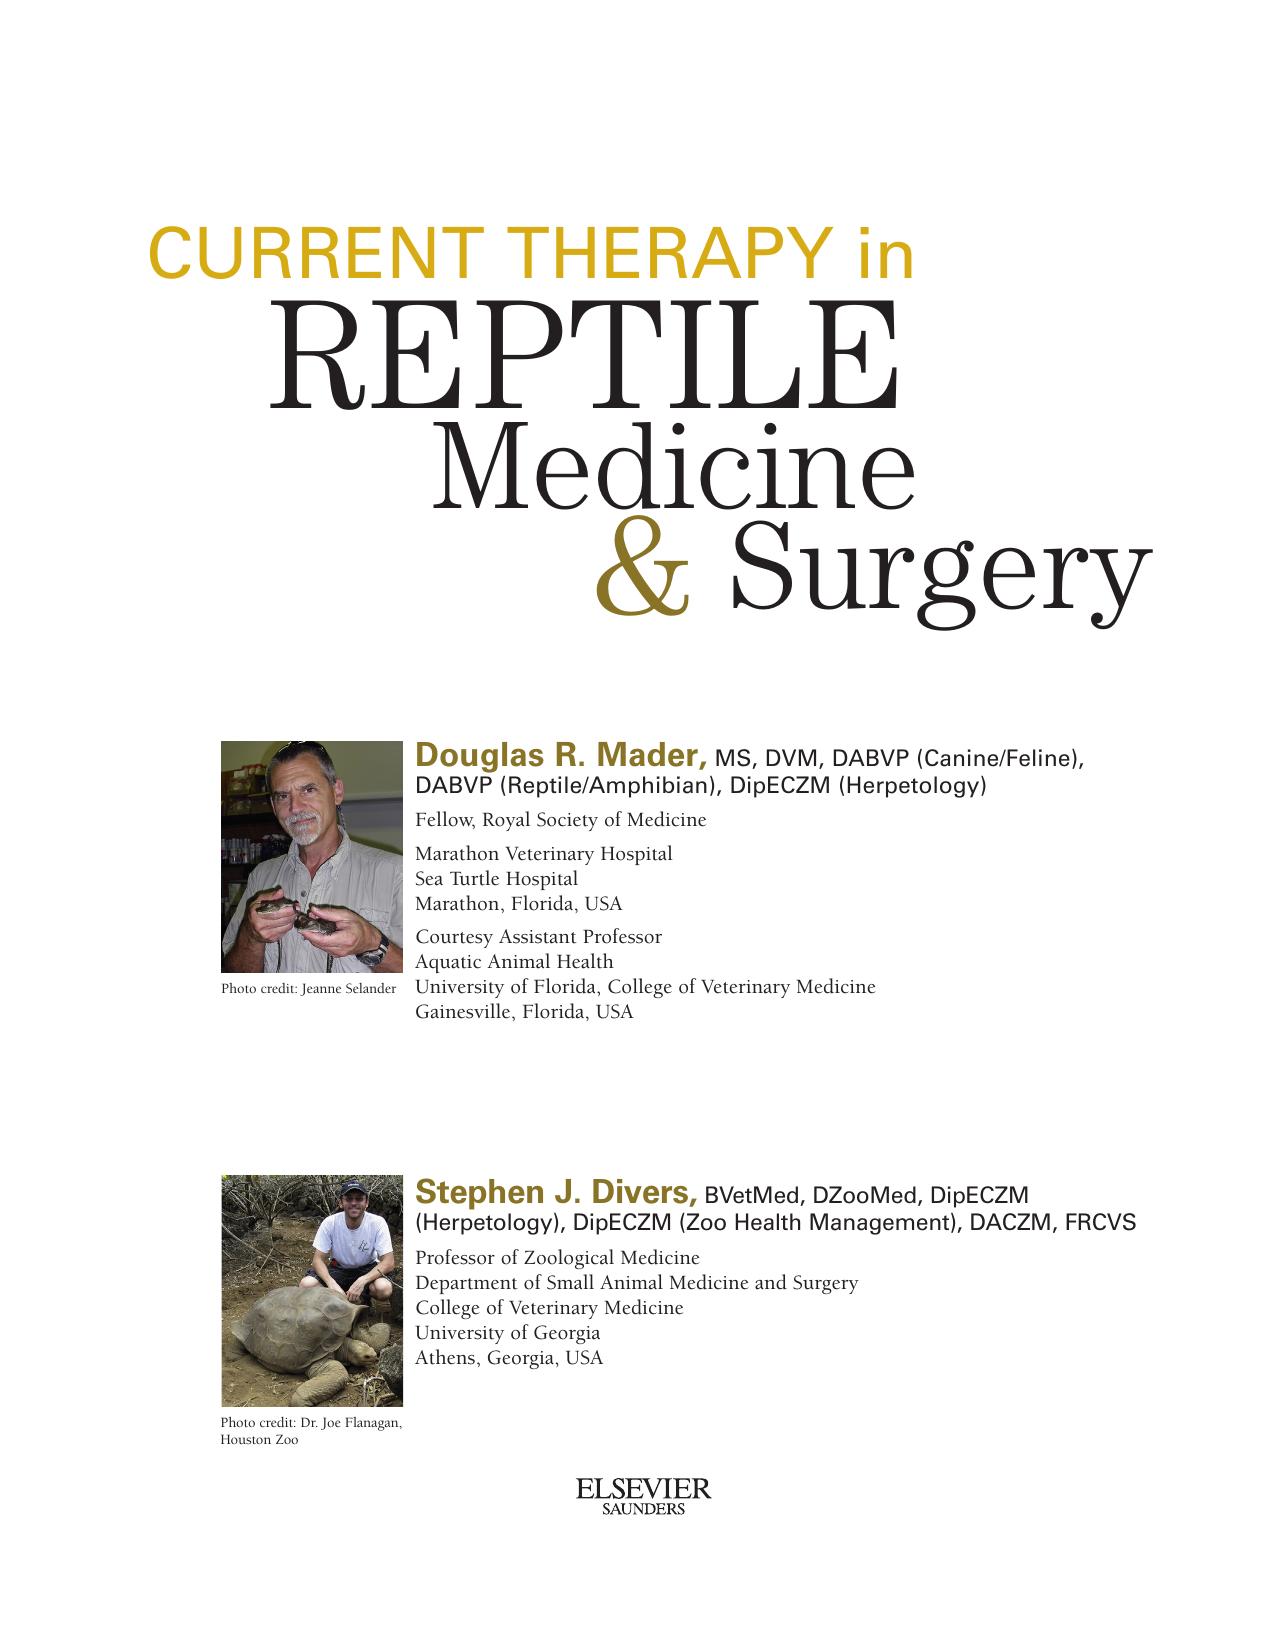 CURRENT THERAPY IN REPTILE MEDICINE AND SURGERY 2014